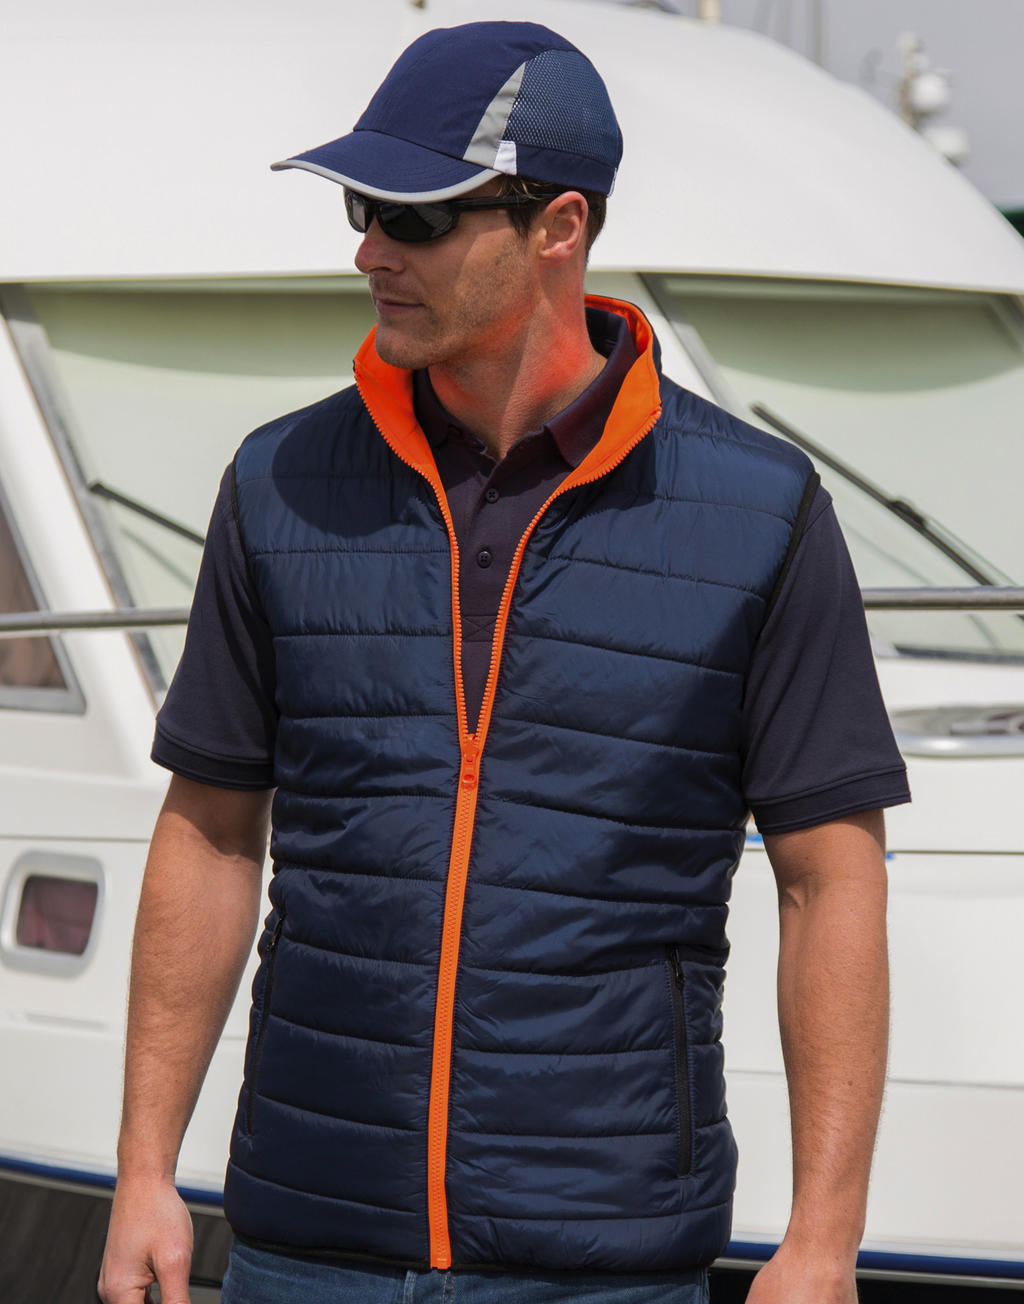  Reversible Soft Padded Safety Gilet in Farbe Fluo Orange/Navy